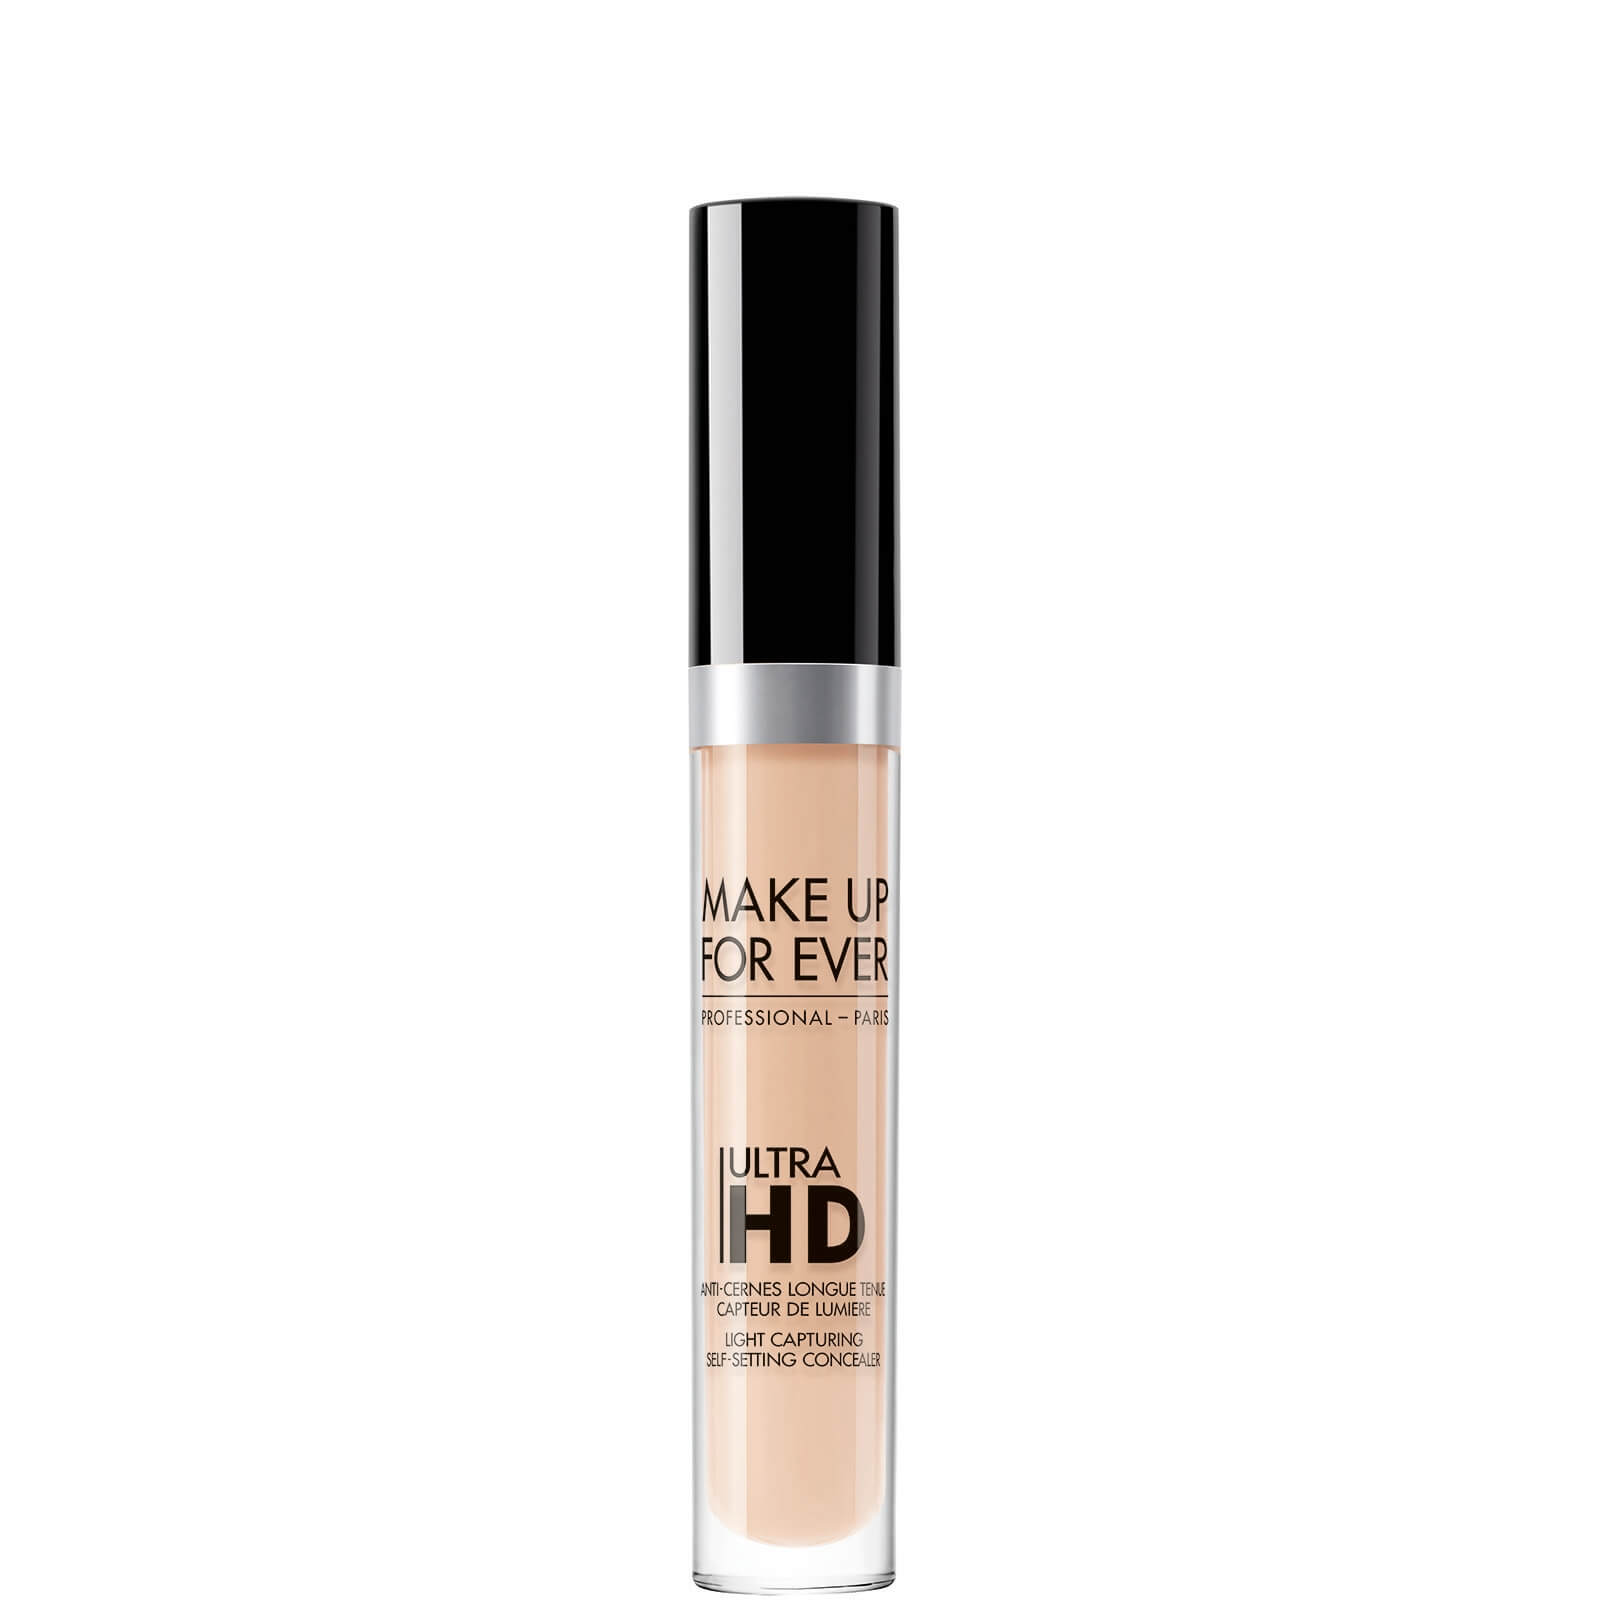 MAKE UP FOR EVER ultra Hd Self-Setting Concealer 5ml (Various Shades) - - 21 Cinnamon